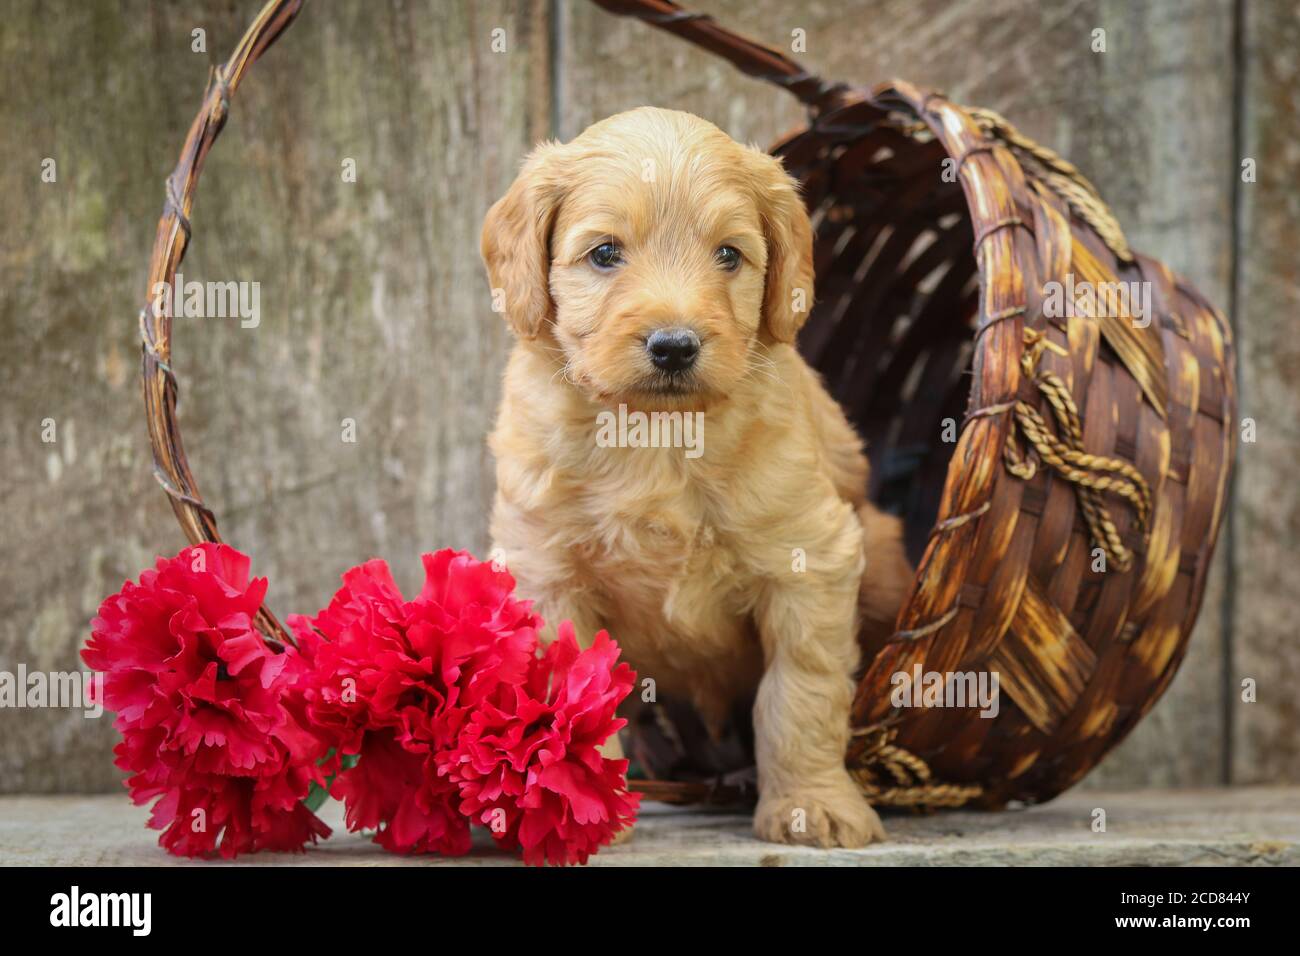 F1 Goldendoodle puppy sitting in a basket on a wooden bench Stock Photo